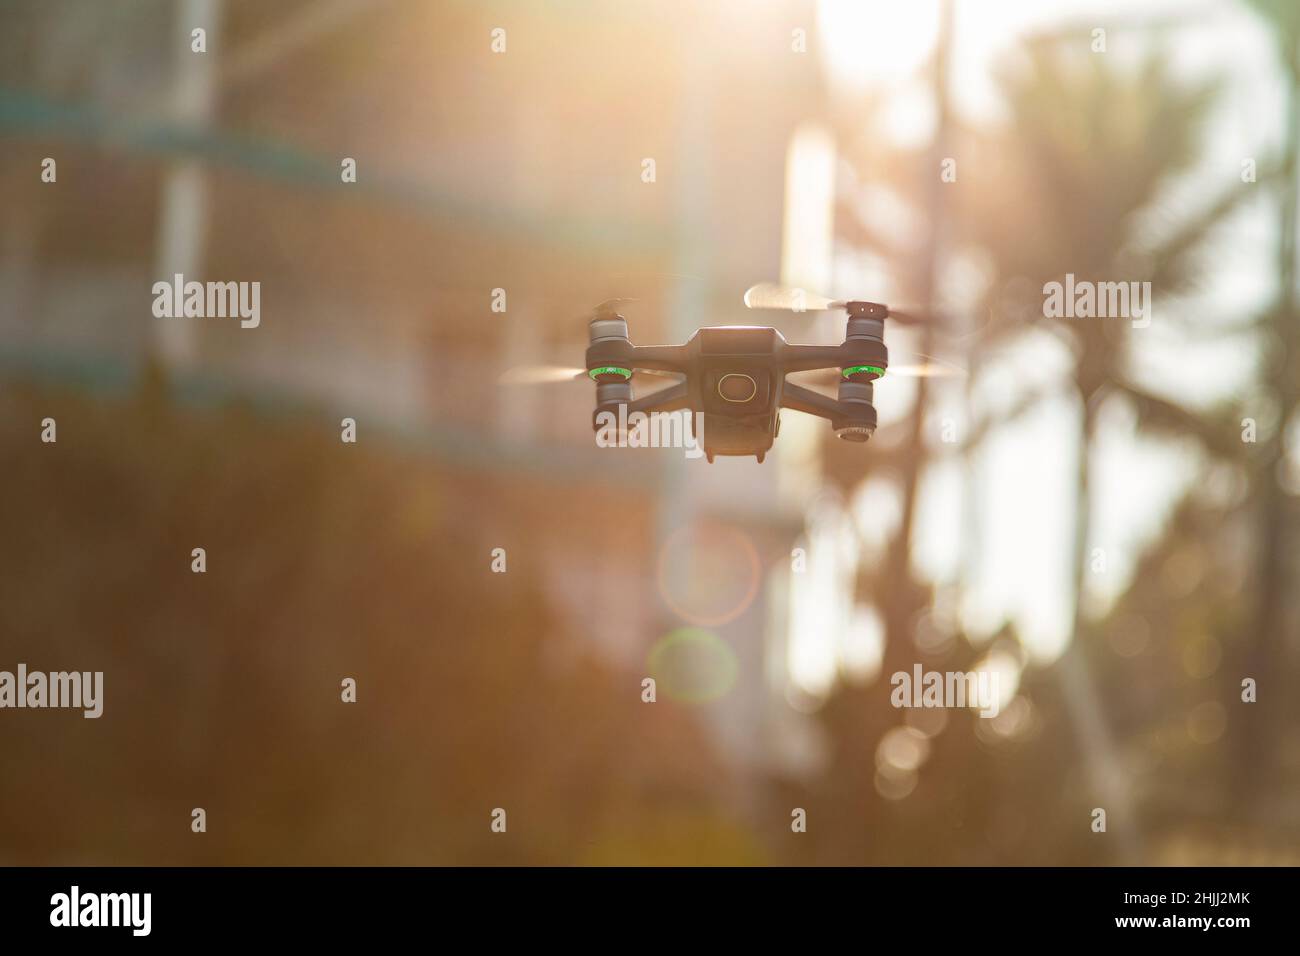 Photograph of a drone in flight Stock Photo